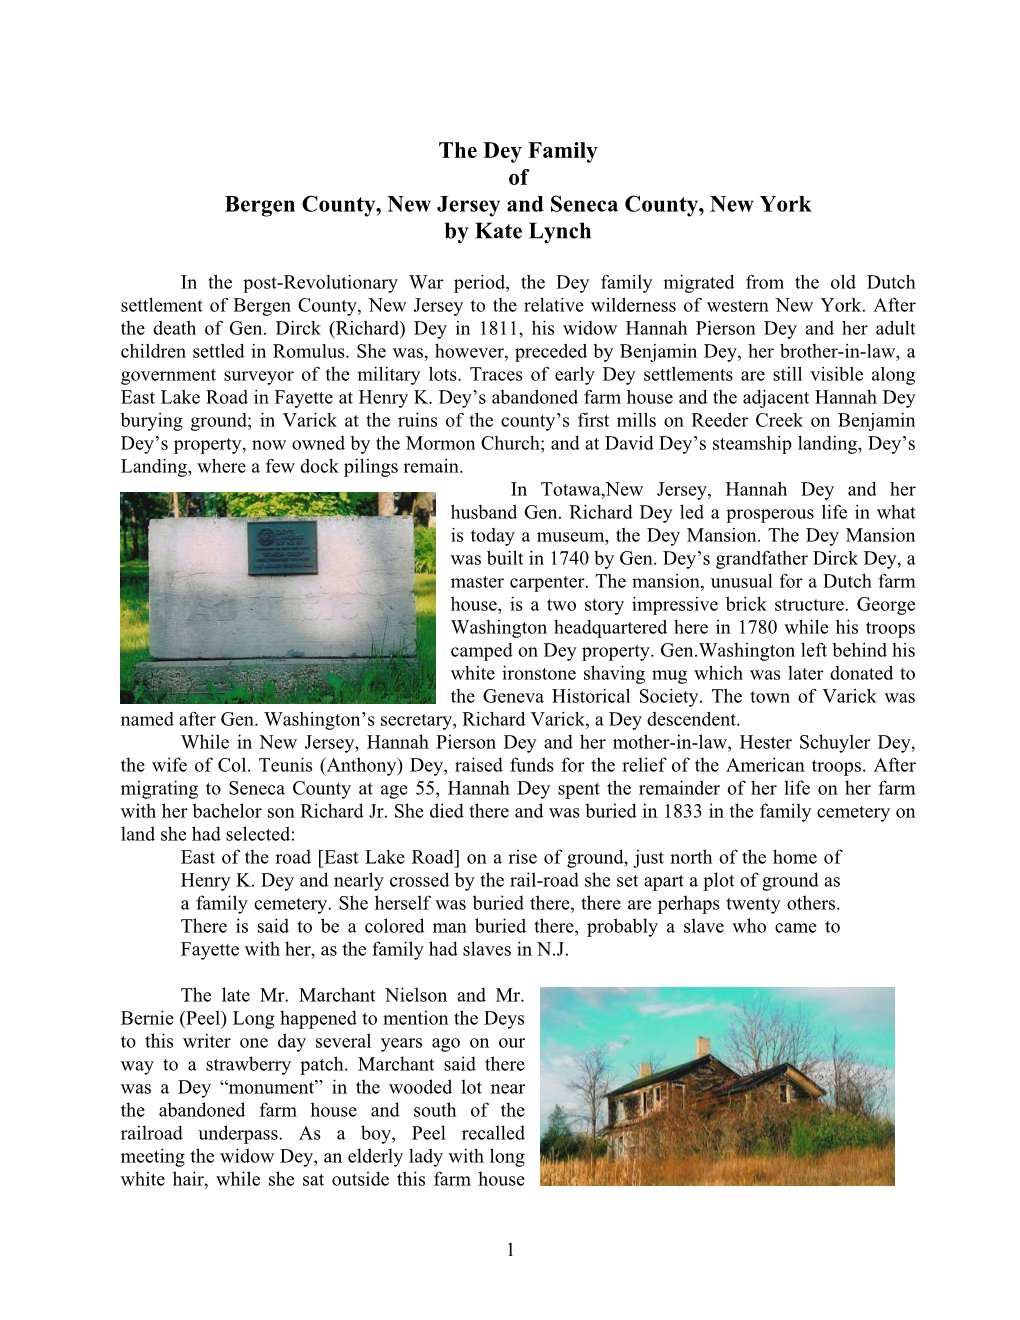 Dey Family of Bergen County, New Jersey and Seneca County, New York by Kate Lynch